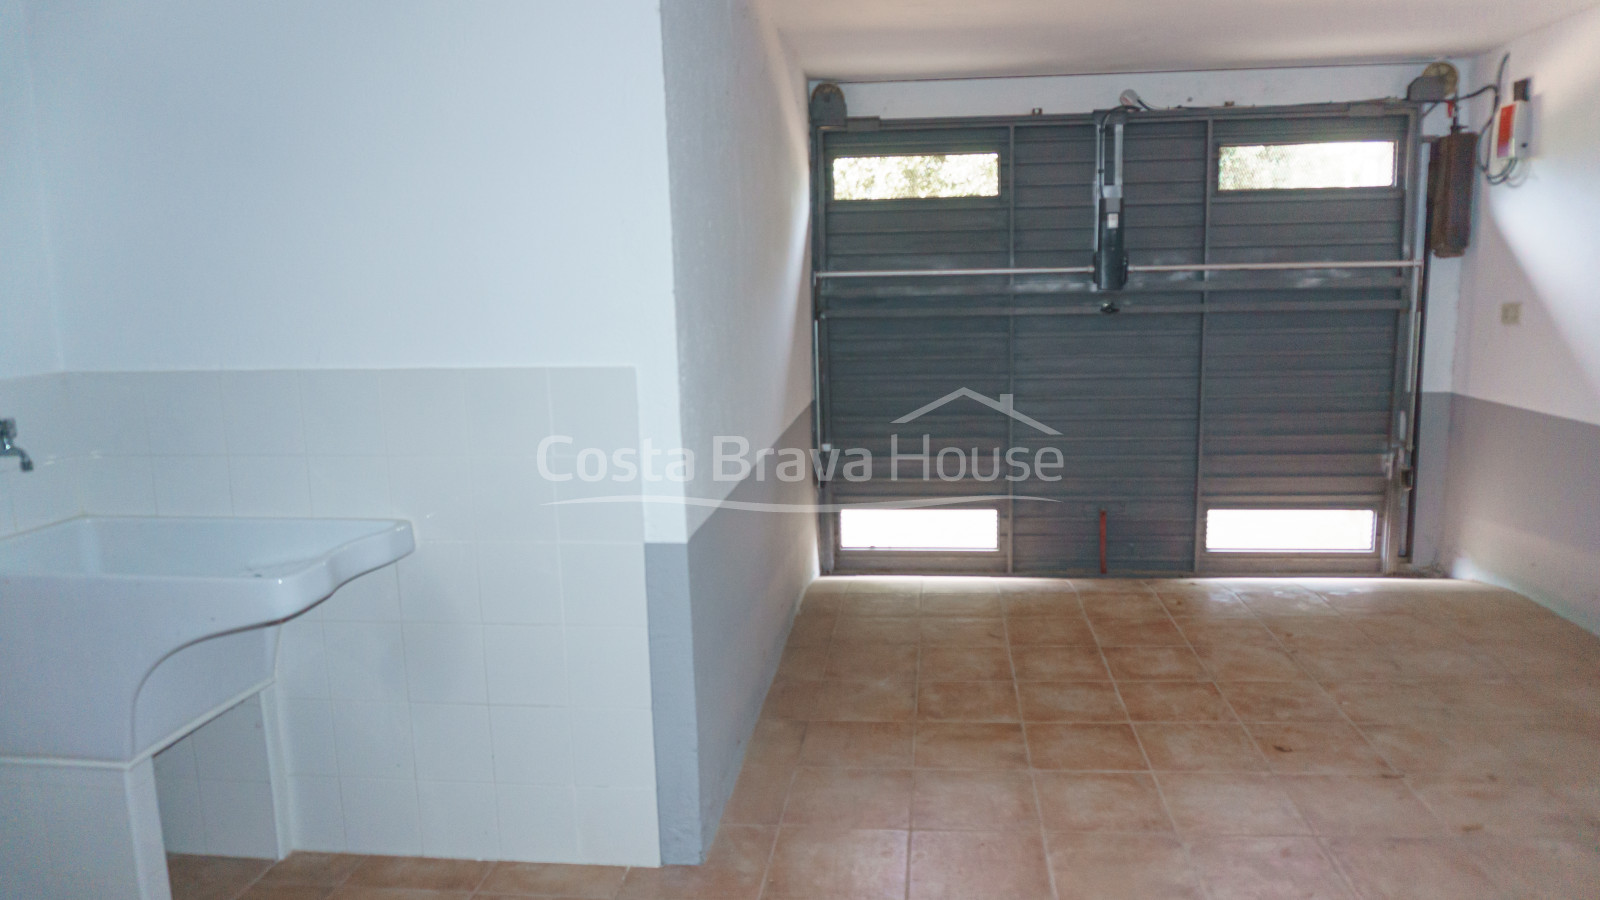 House with pool and garden for sale in Tamariu, just 1 km from the beach, on a 1600 m² plot